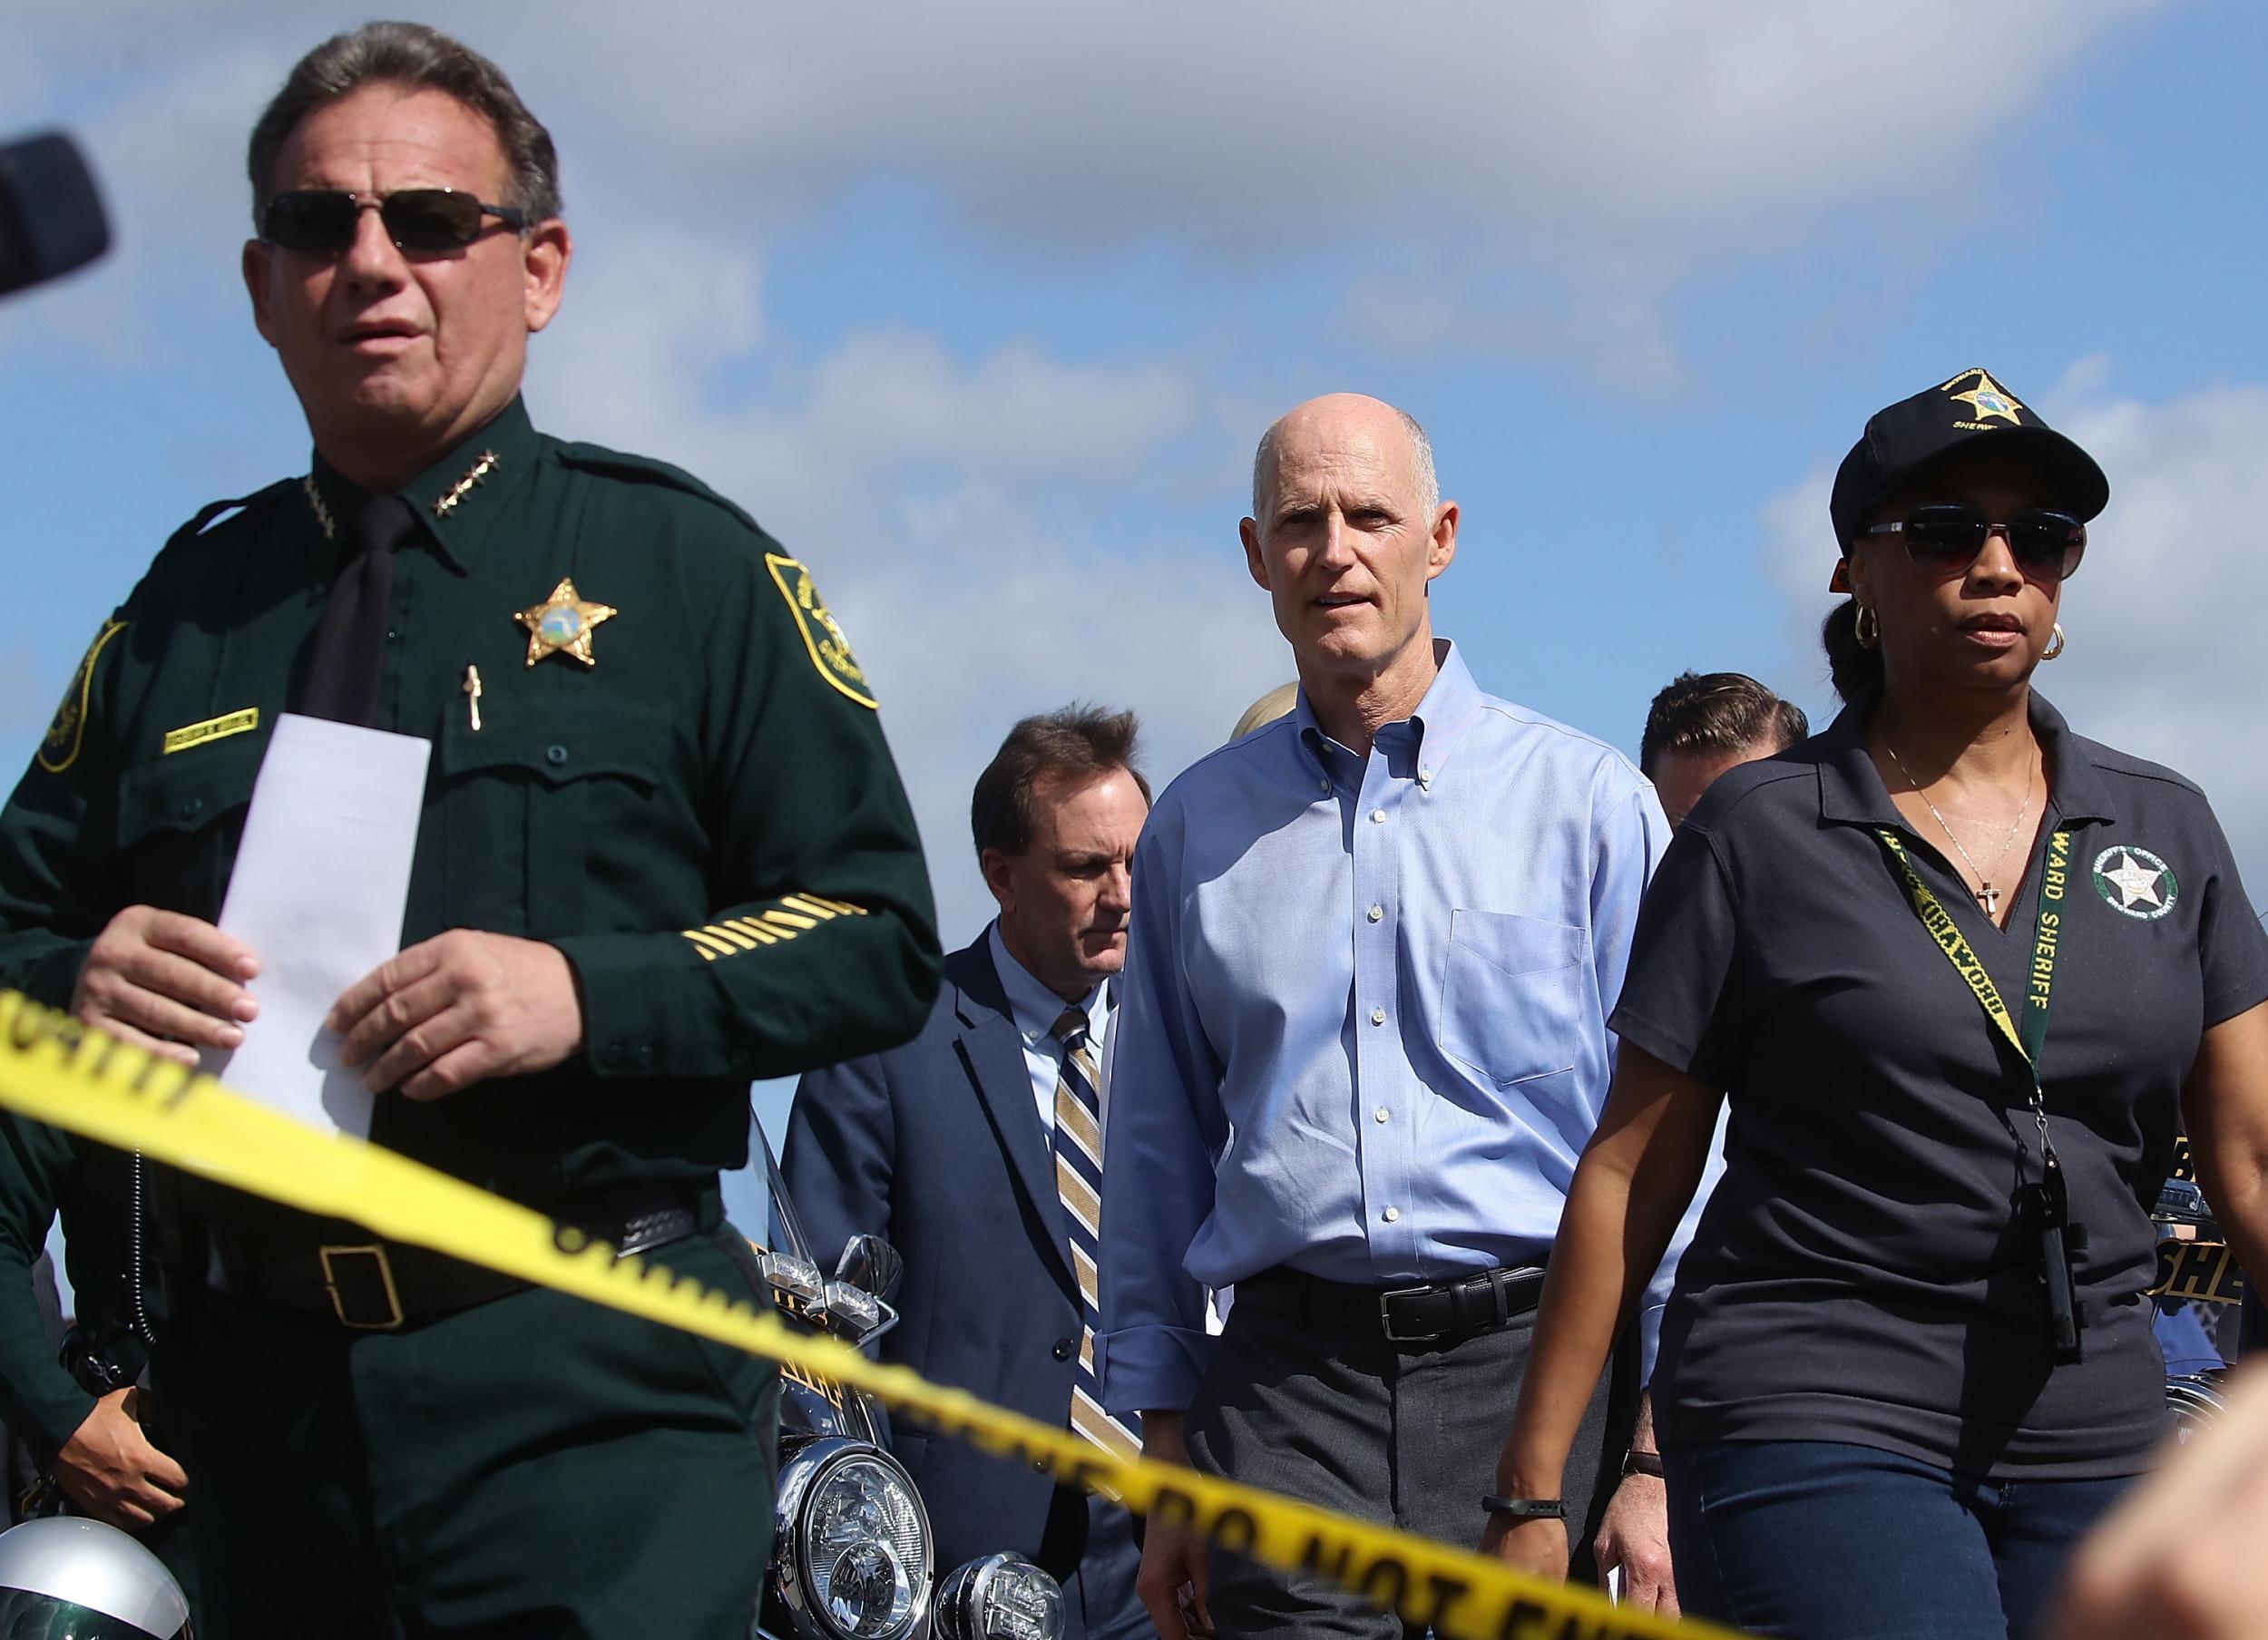 Florida Governor Rick Scott,(R), and Broward County Sheriff, Scott Israel (L), walk up to the media to speak about the mass shooting